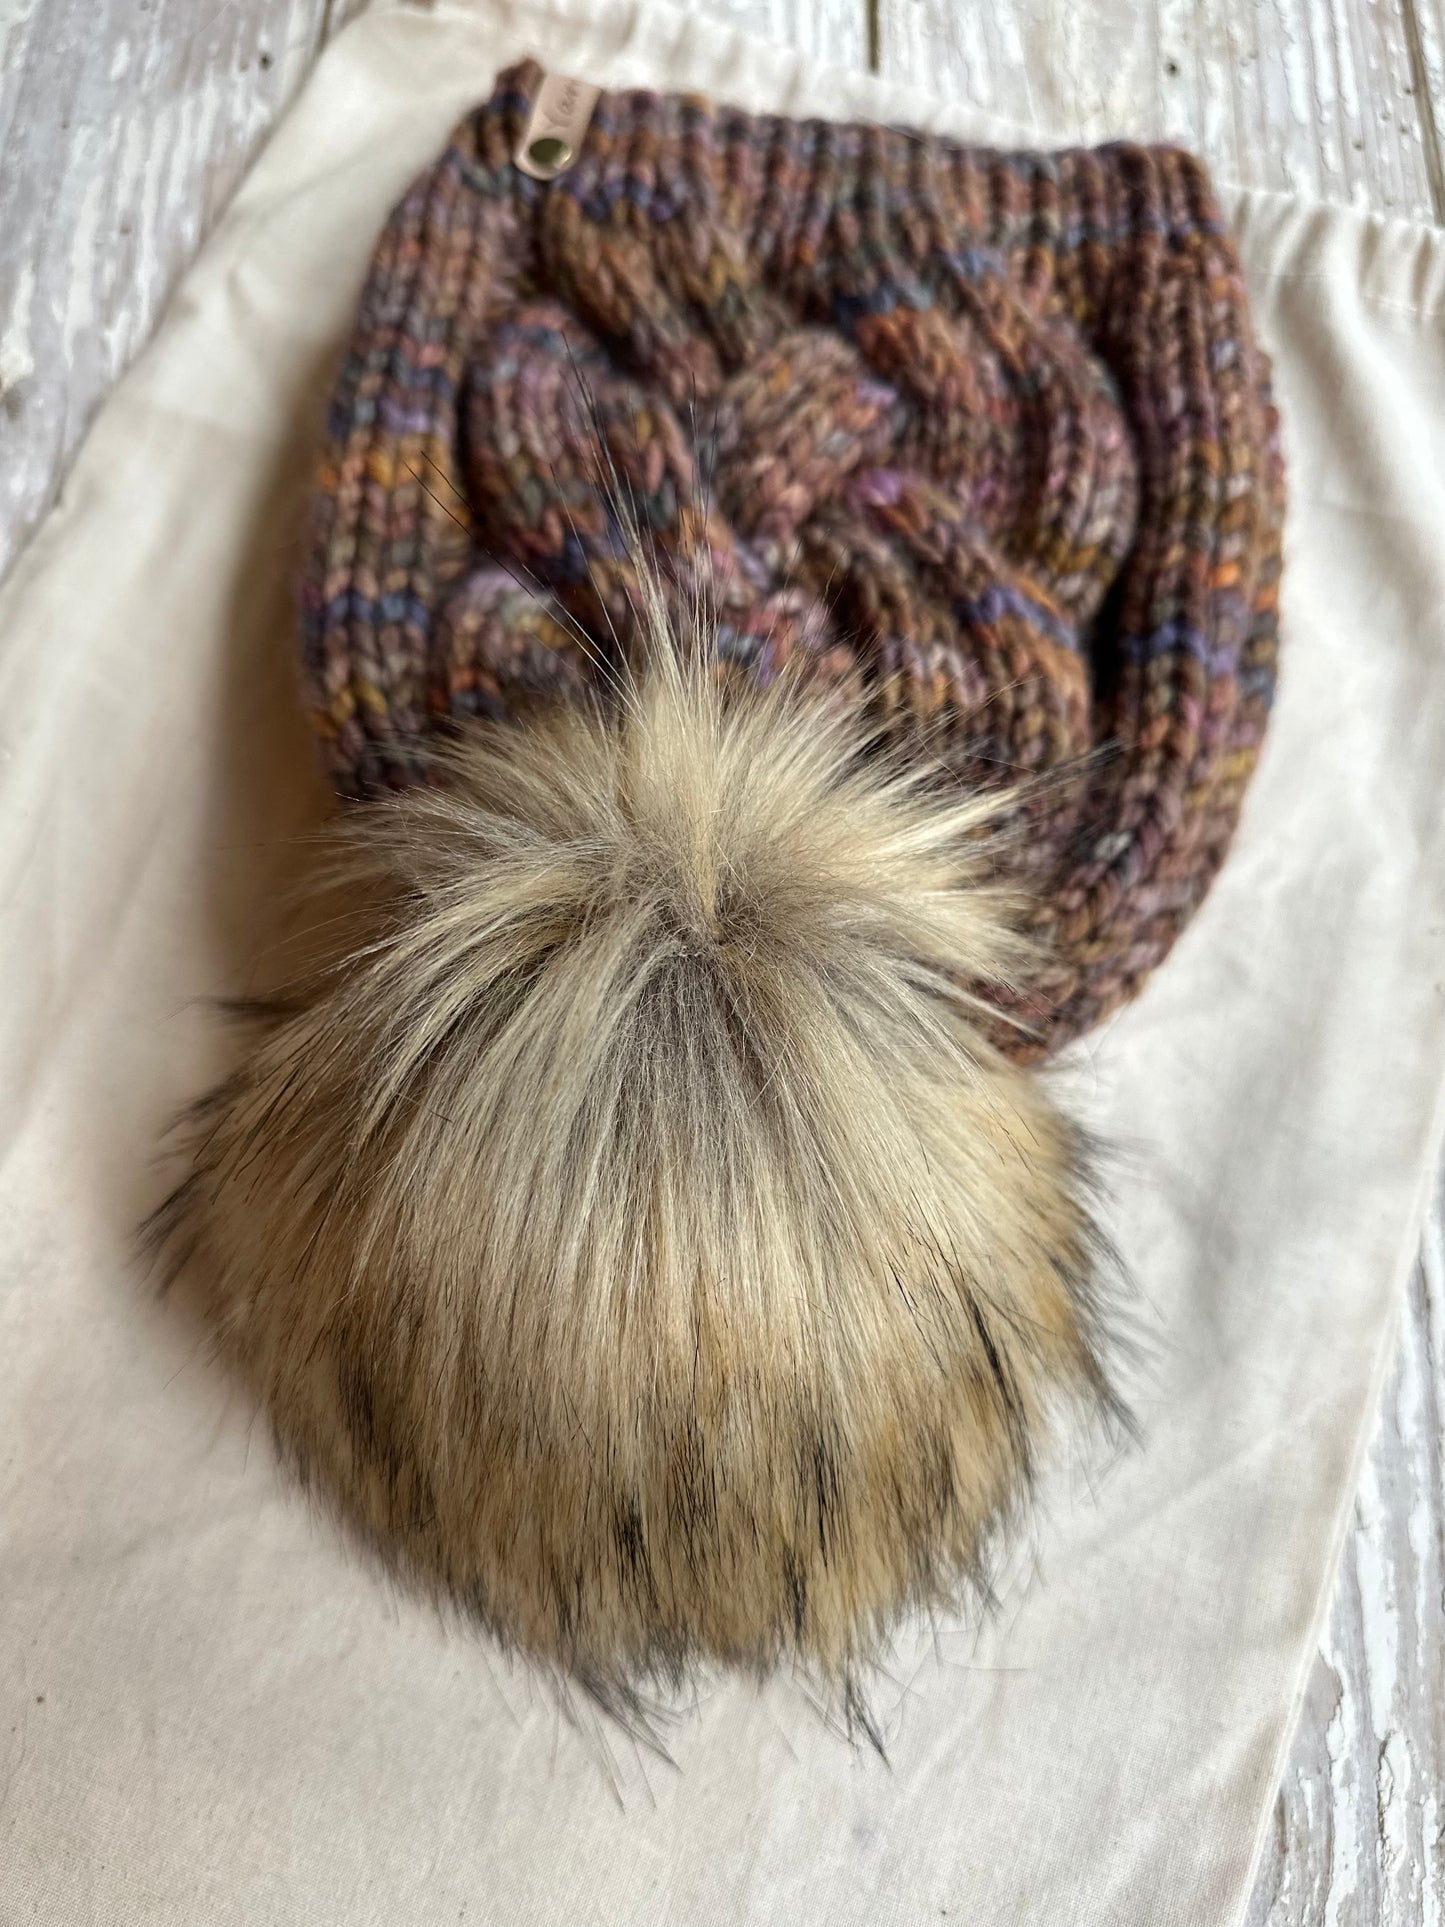 Merino wool set- knit hat with faux fur pom and knit cowl